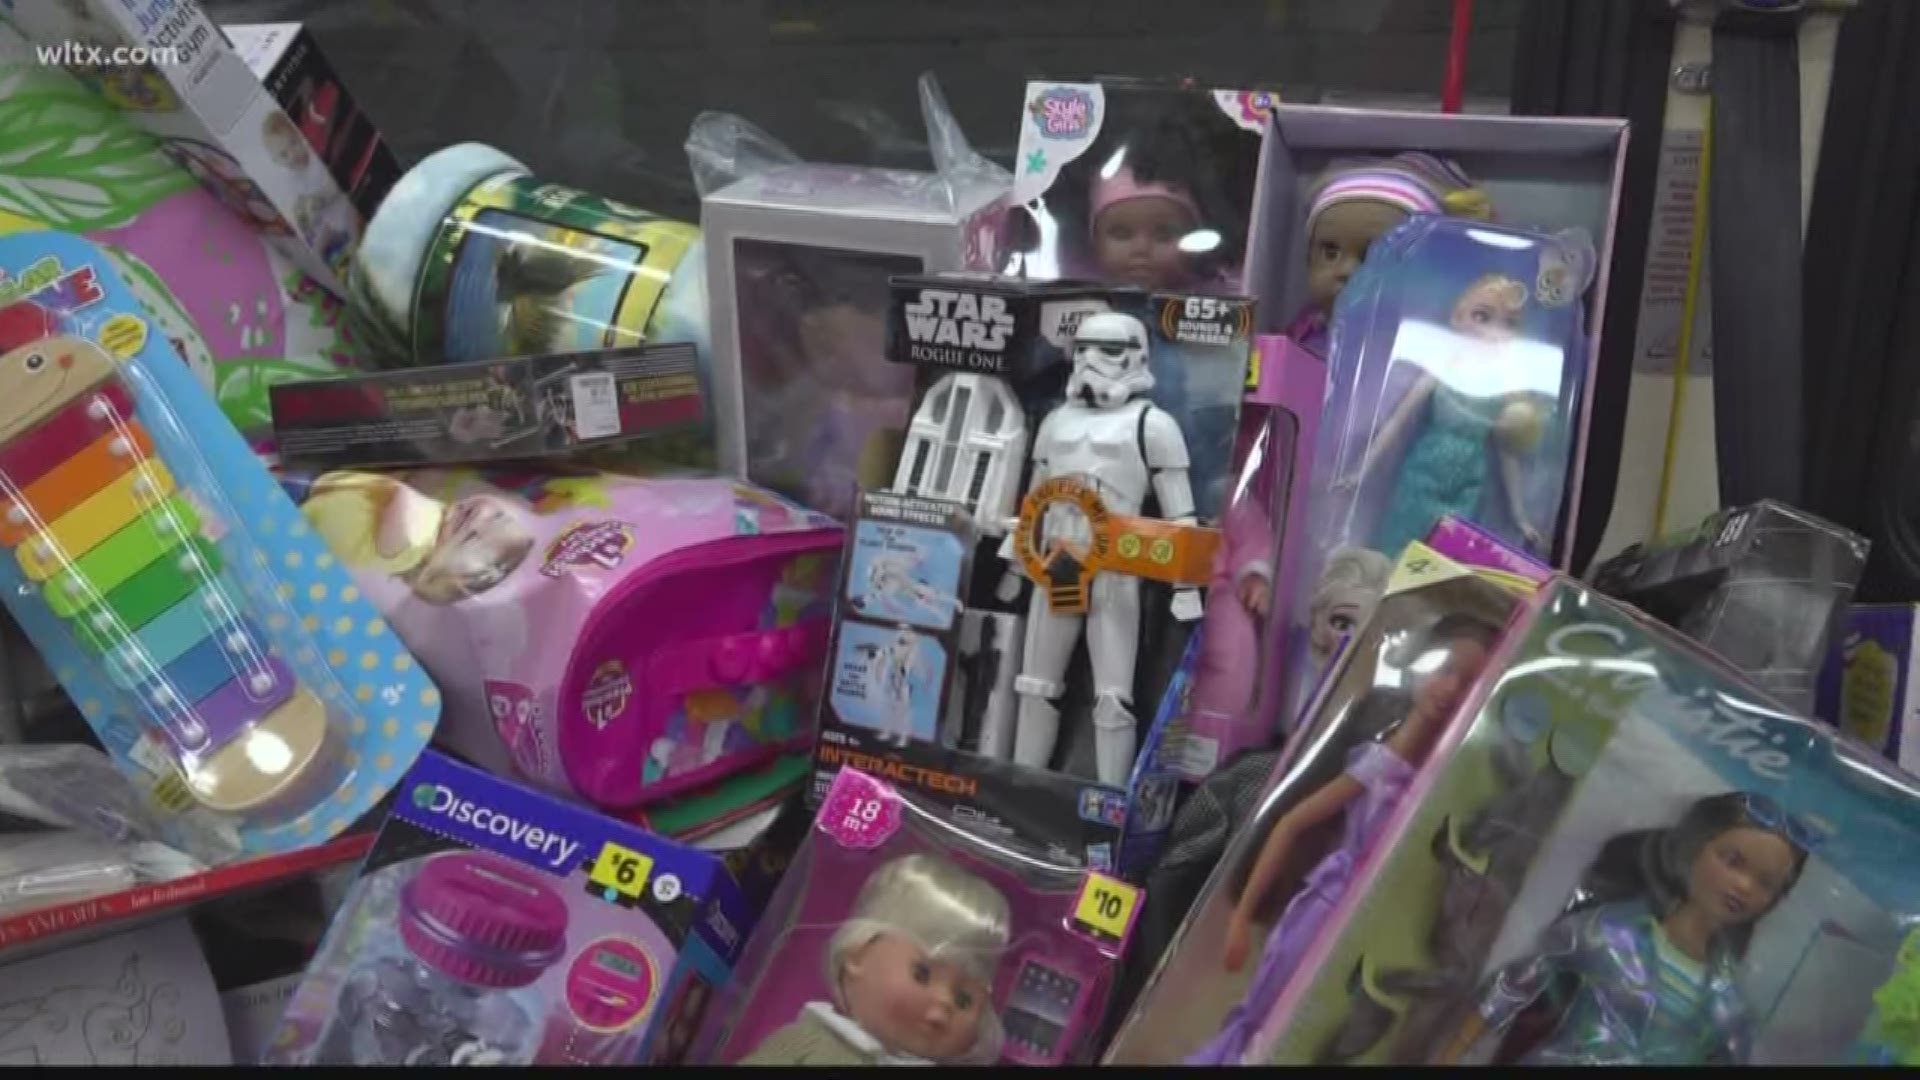 We asked our viewers to come out and donate toys for children. And boy, did you all deliver!